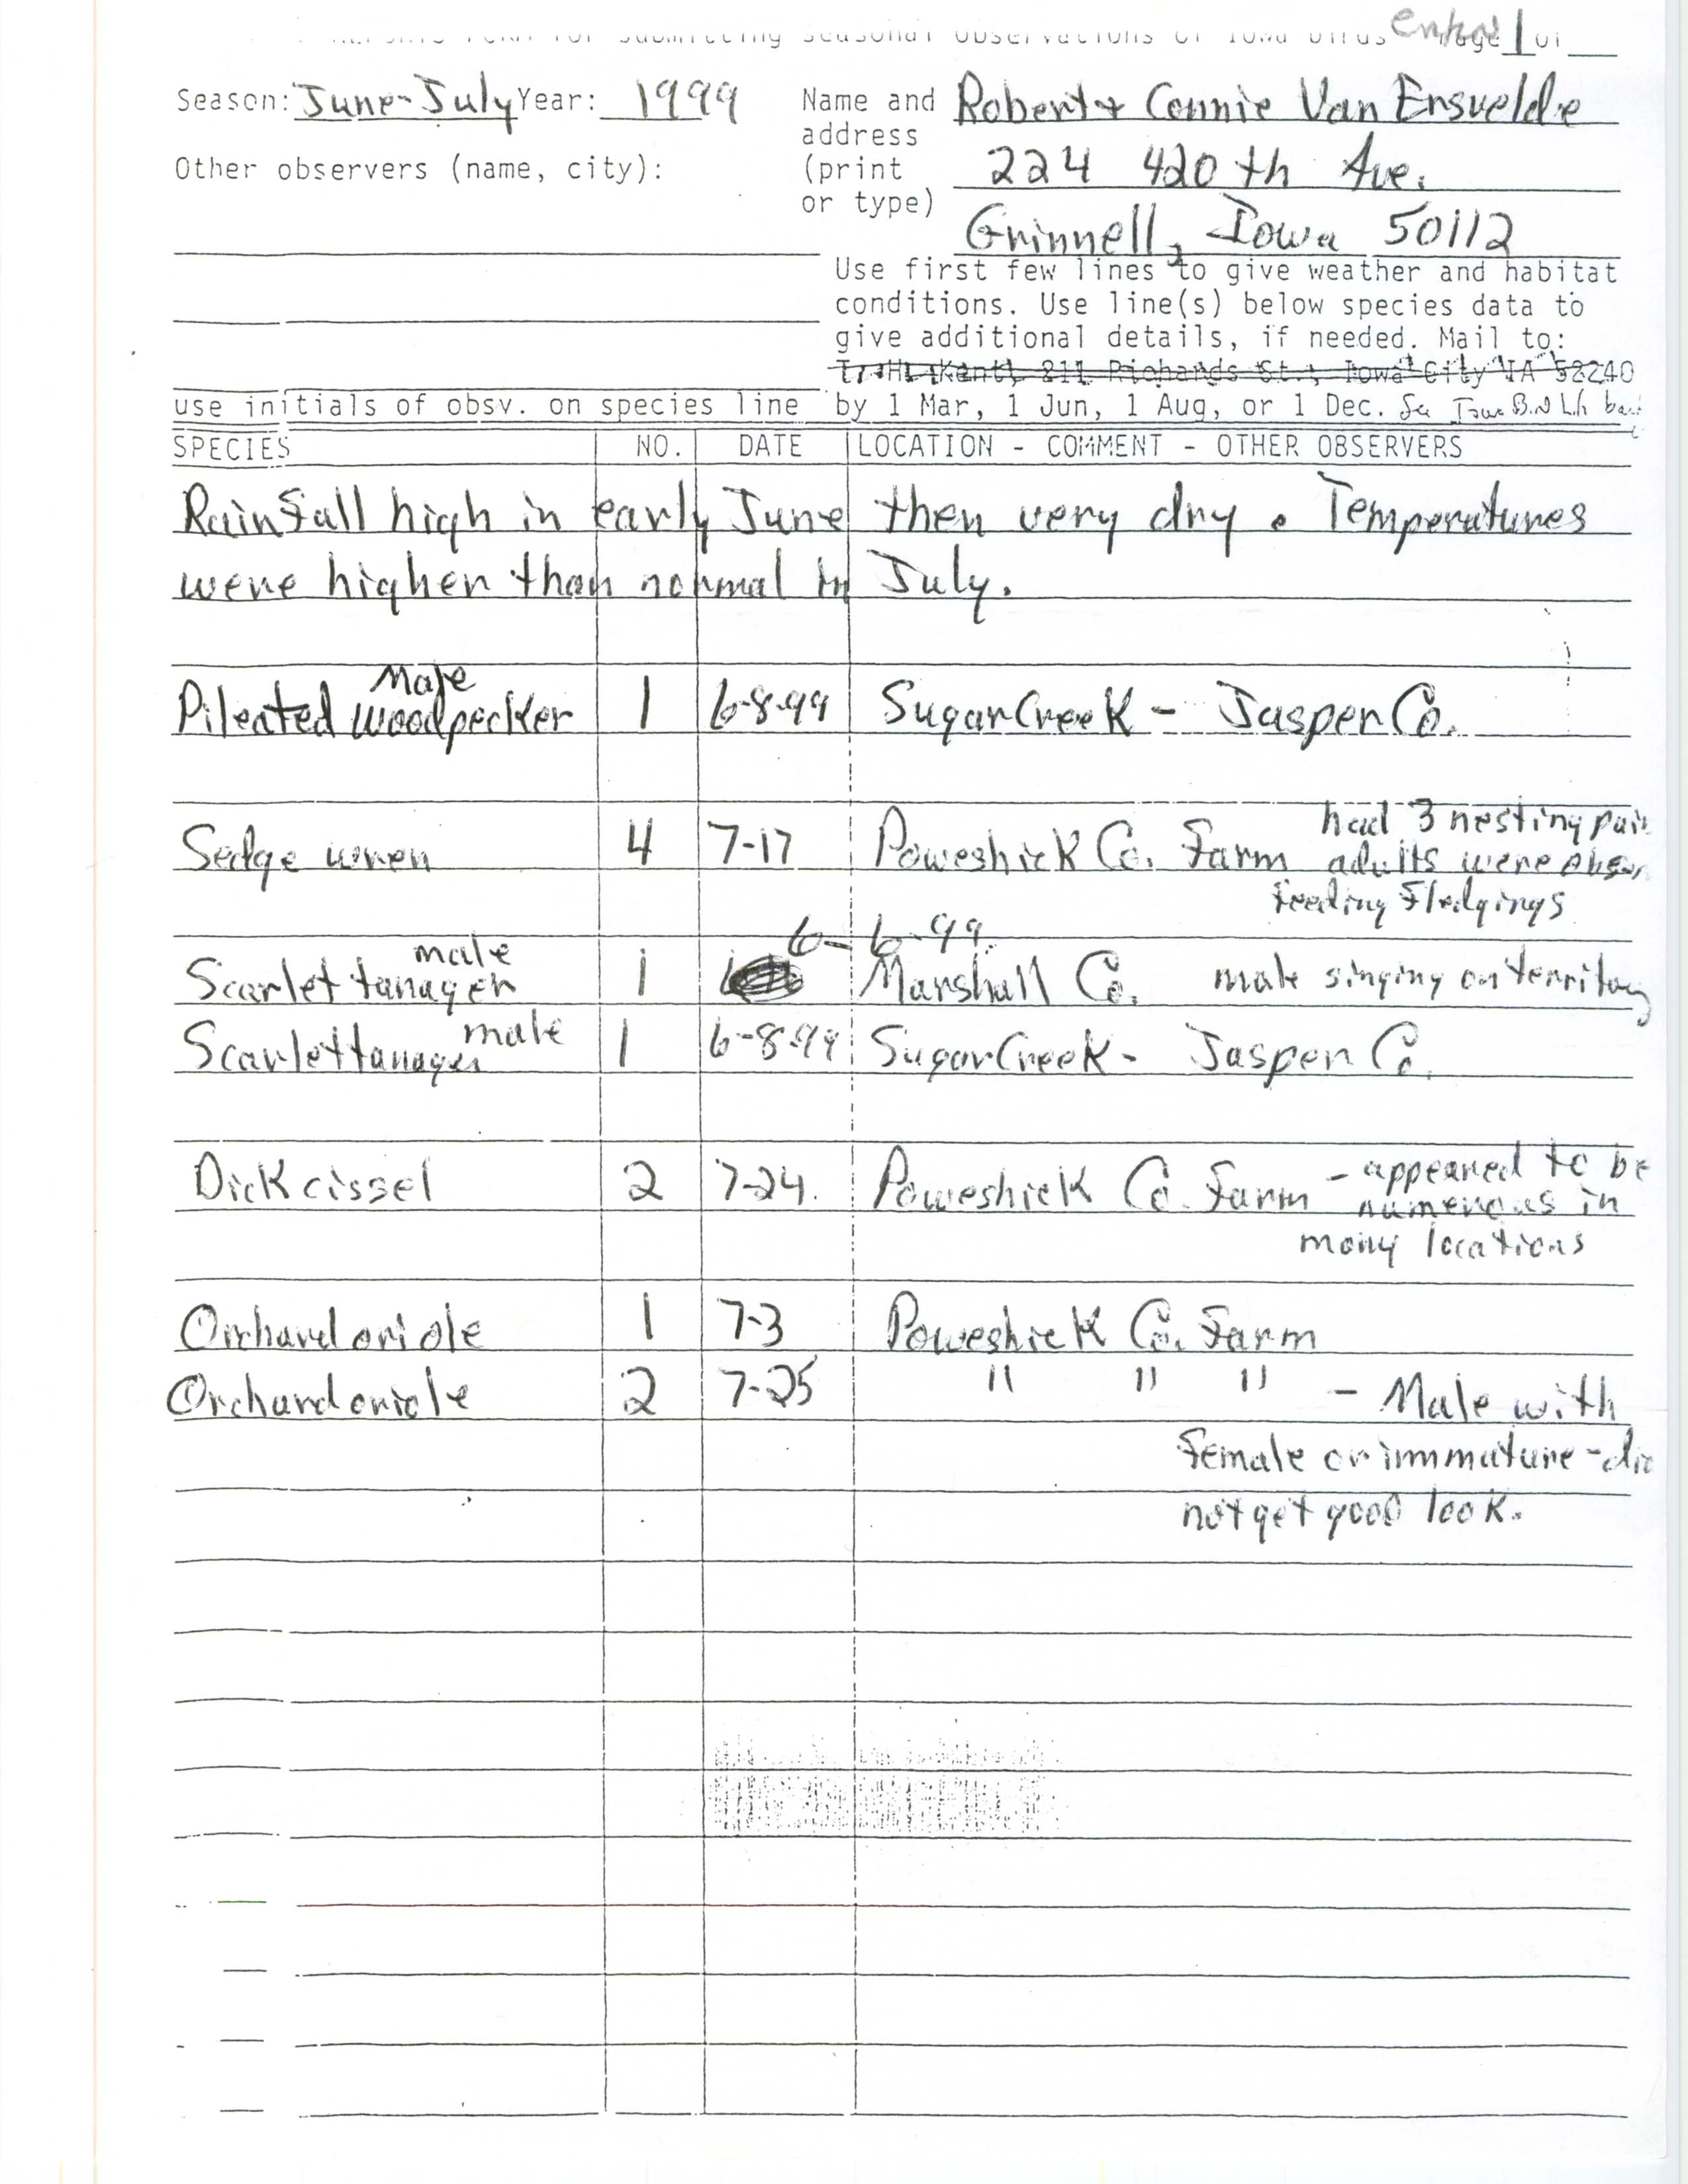 Field reports form for submitting seasonal observations of Iowa birds, summer 1999, Robert & Connie VanErsvelde